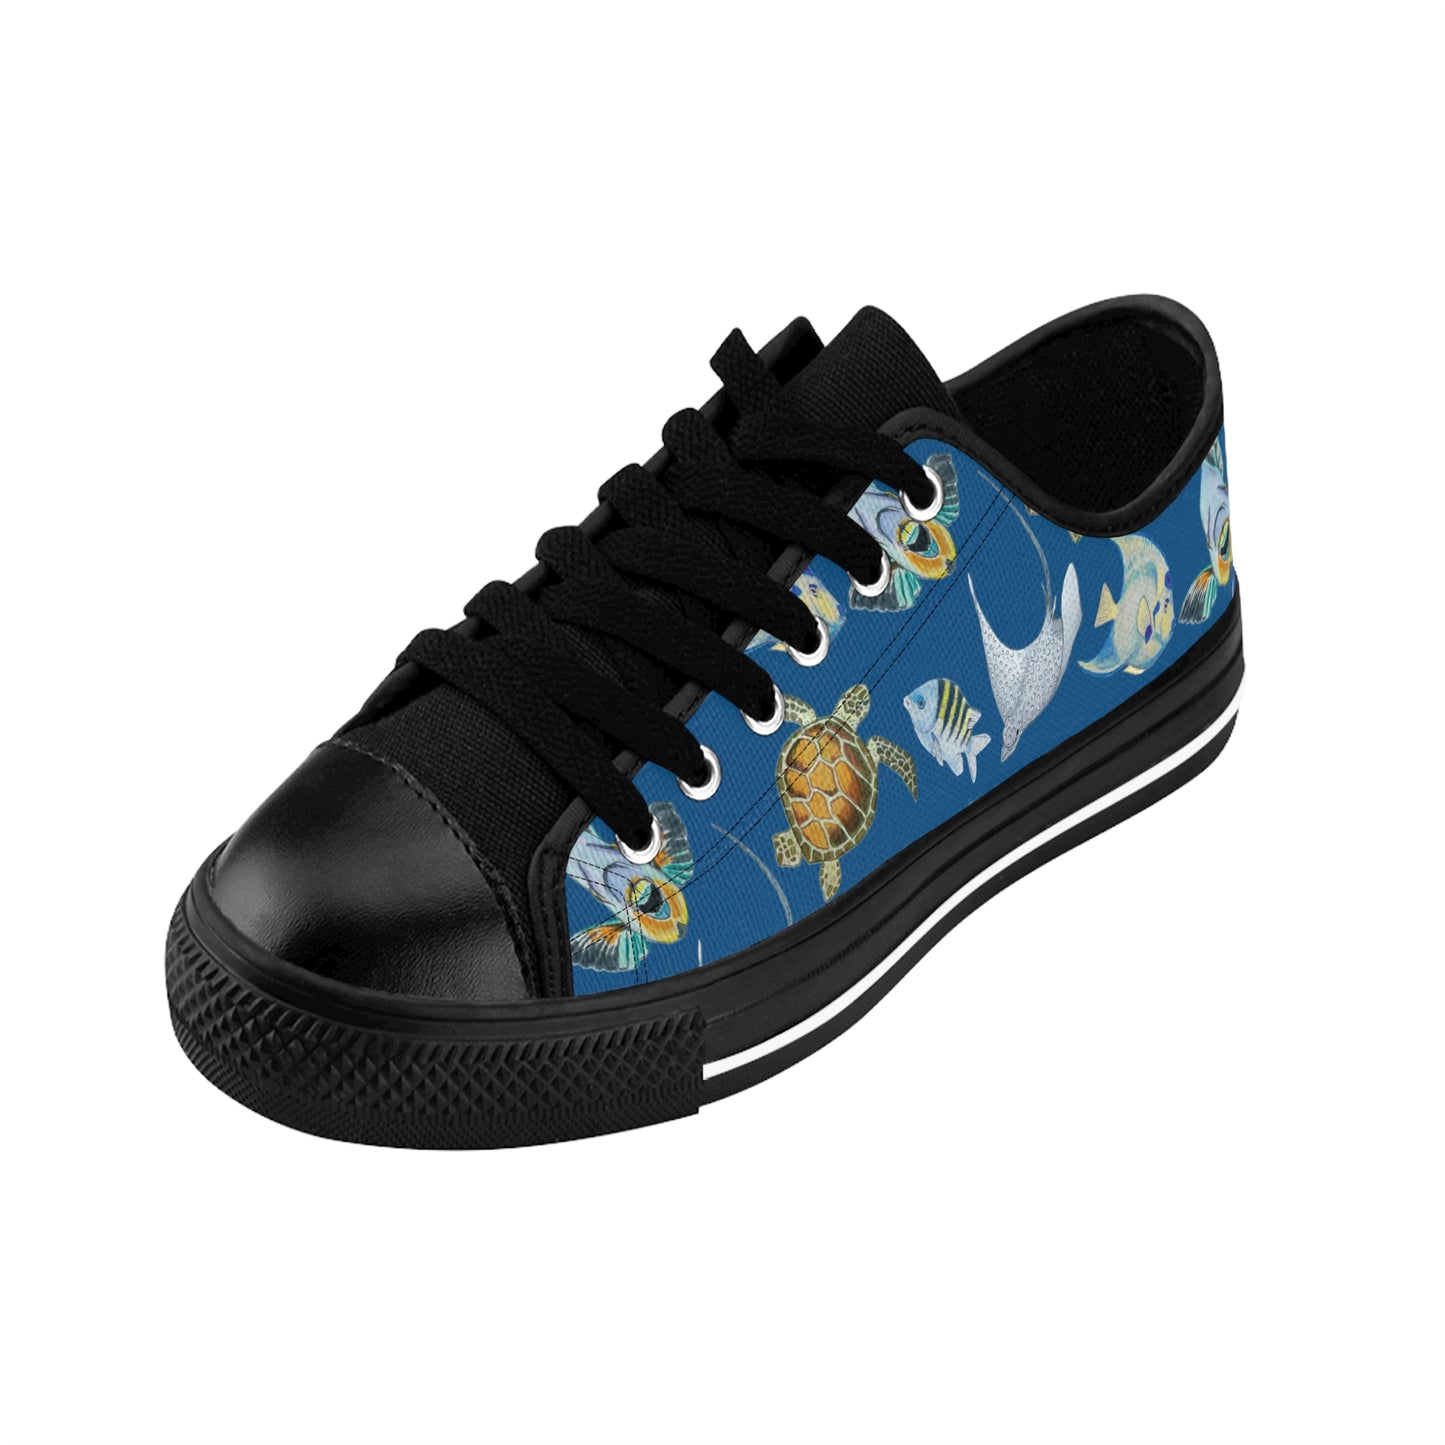 Sargasso Sea - Low Top Sneakers - Pacific Blue